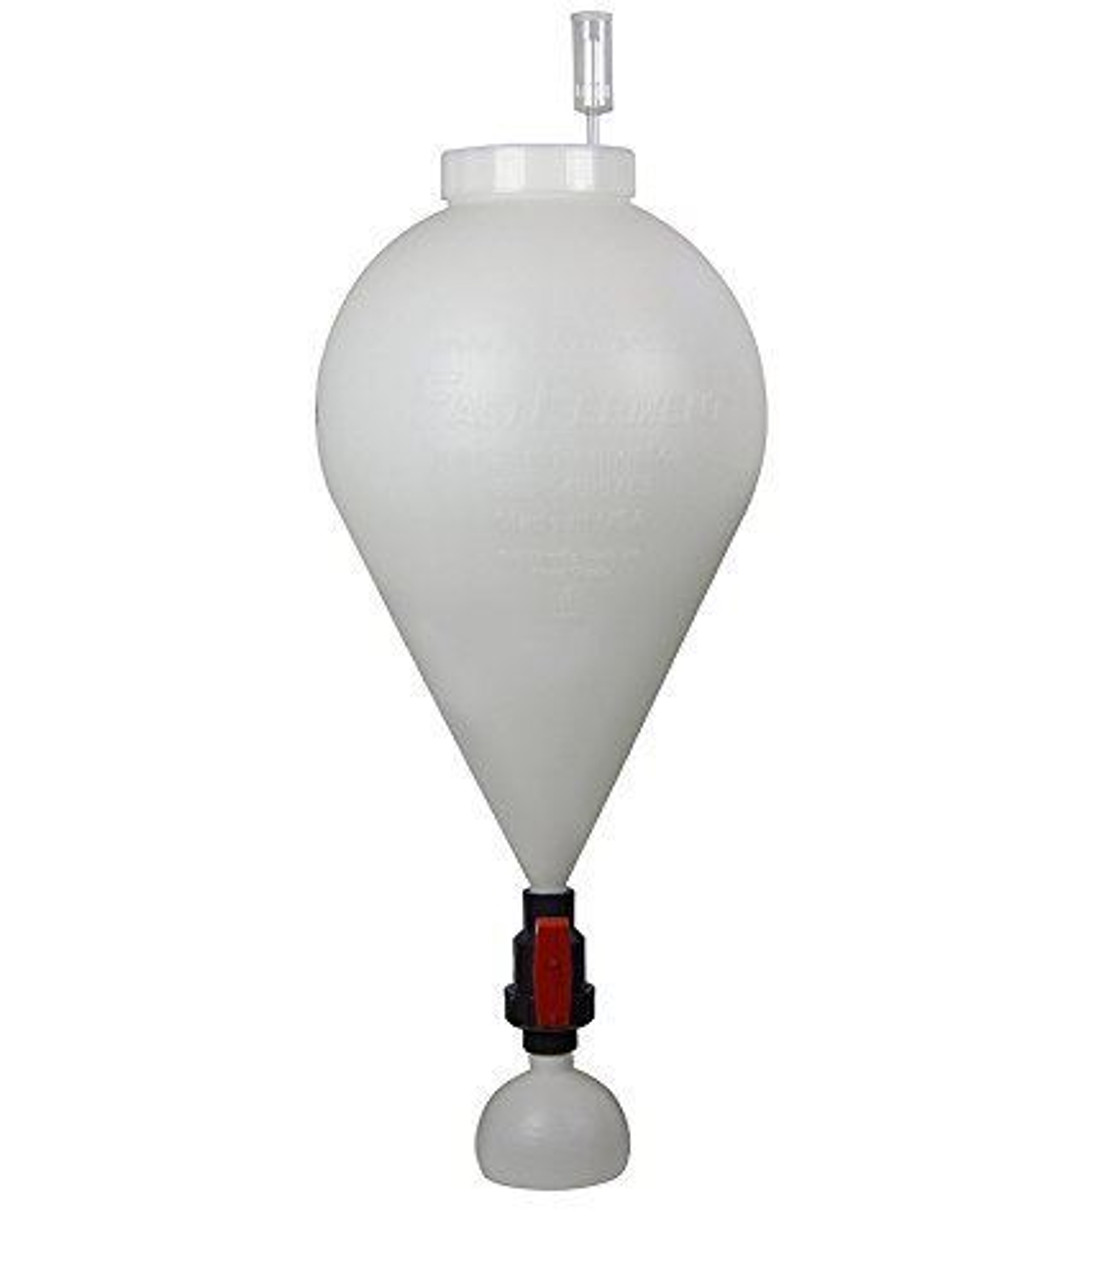 FastFerment Conical Fermenter 7.9 Gallon - Home-Brew Kit - BPA Free Food grade Primary Carboy Fermenter: Beer Brewing, Wine Fermentation or a Hard Cider brewing kit. Wall mount included (7.9 Gallon)